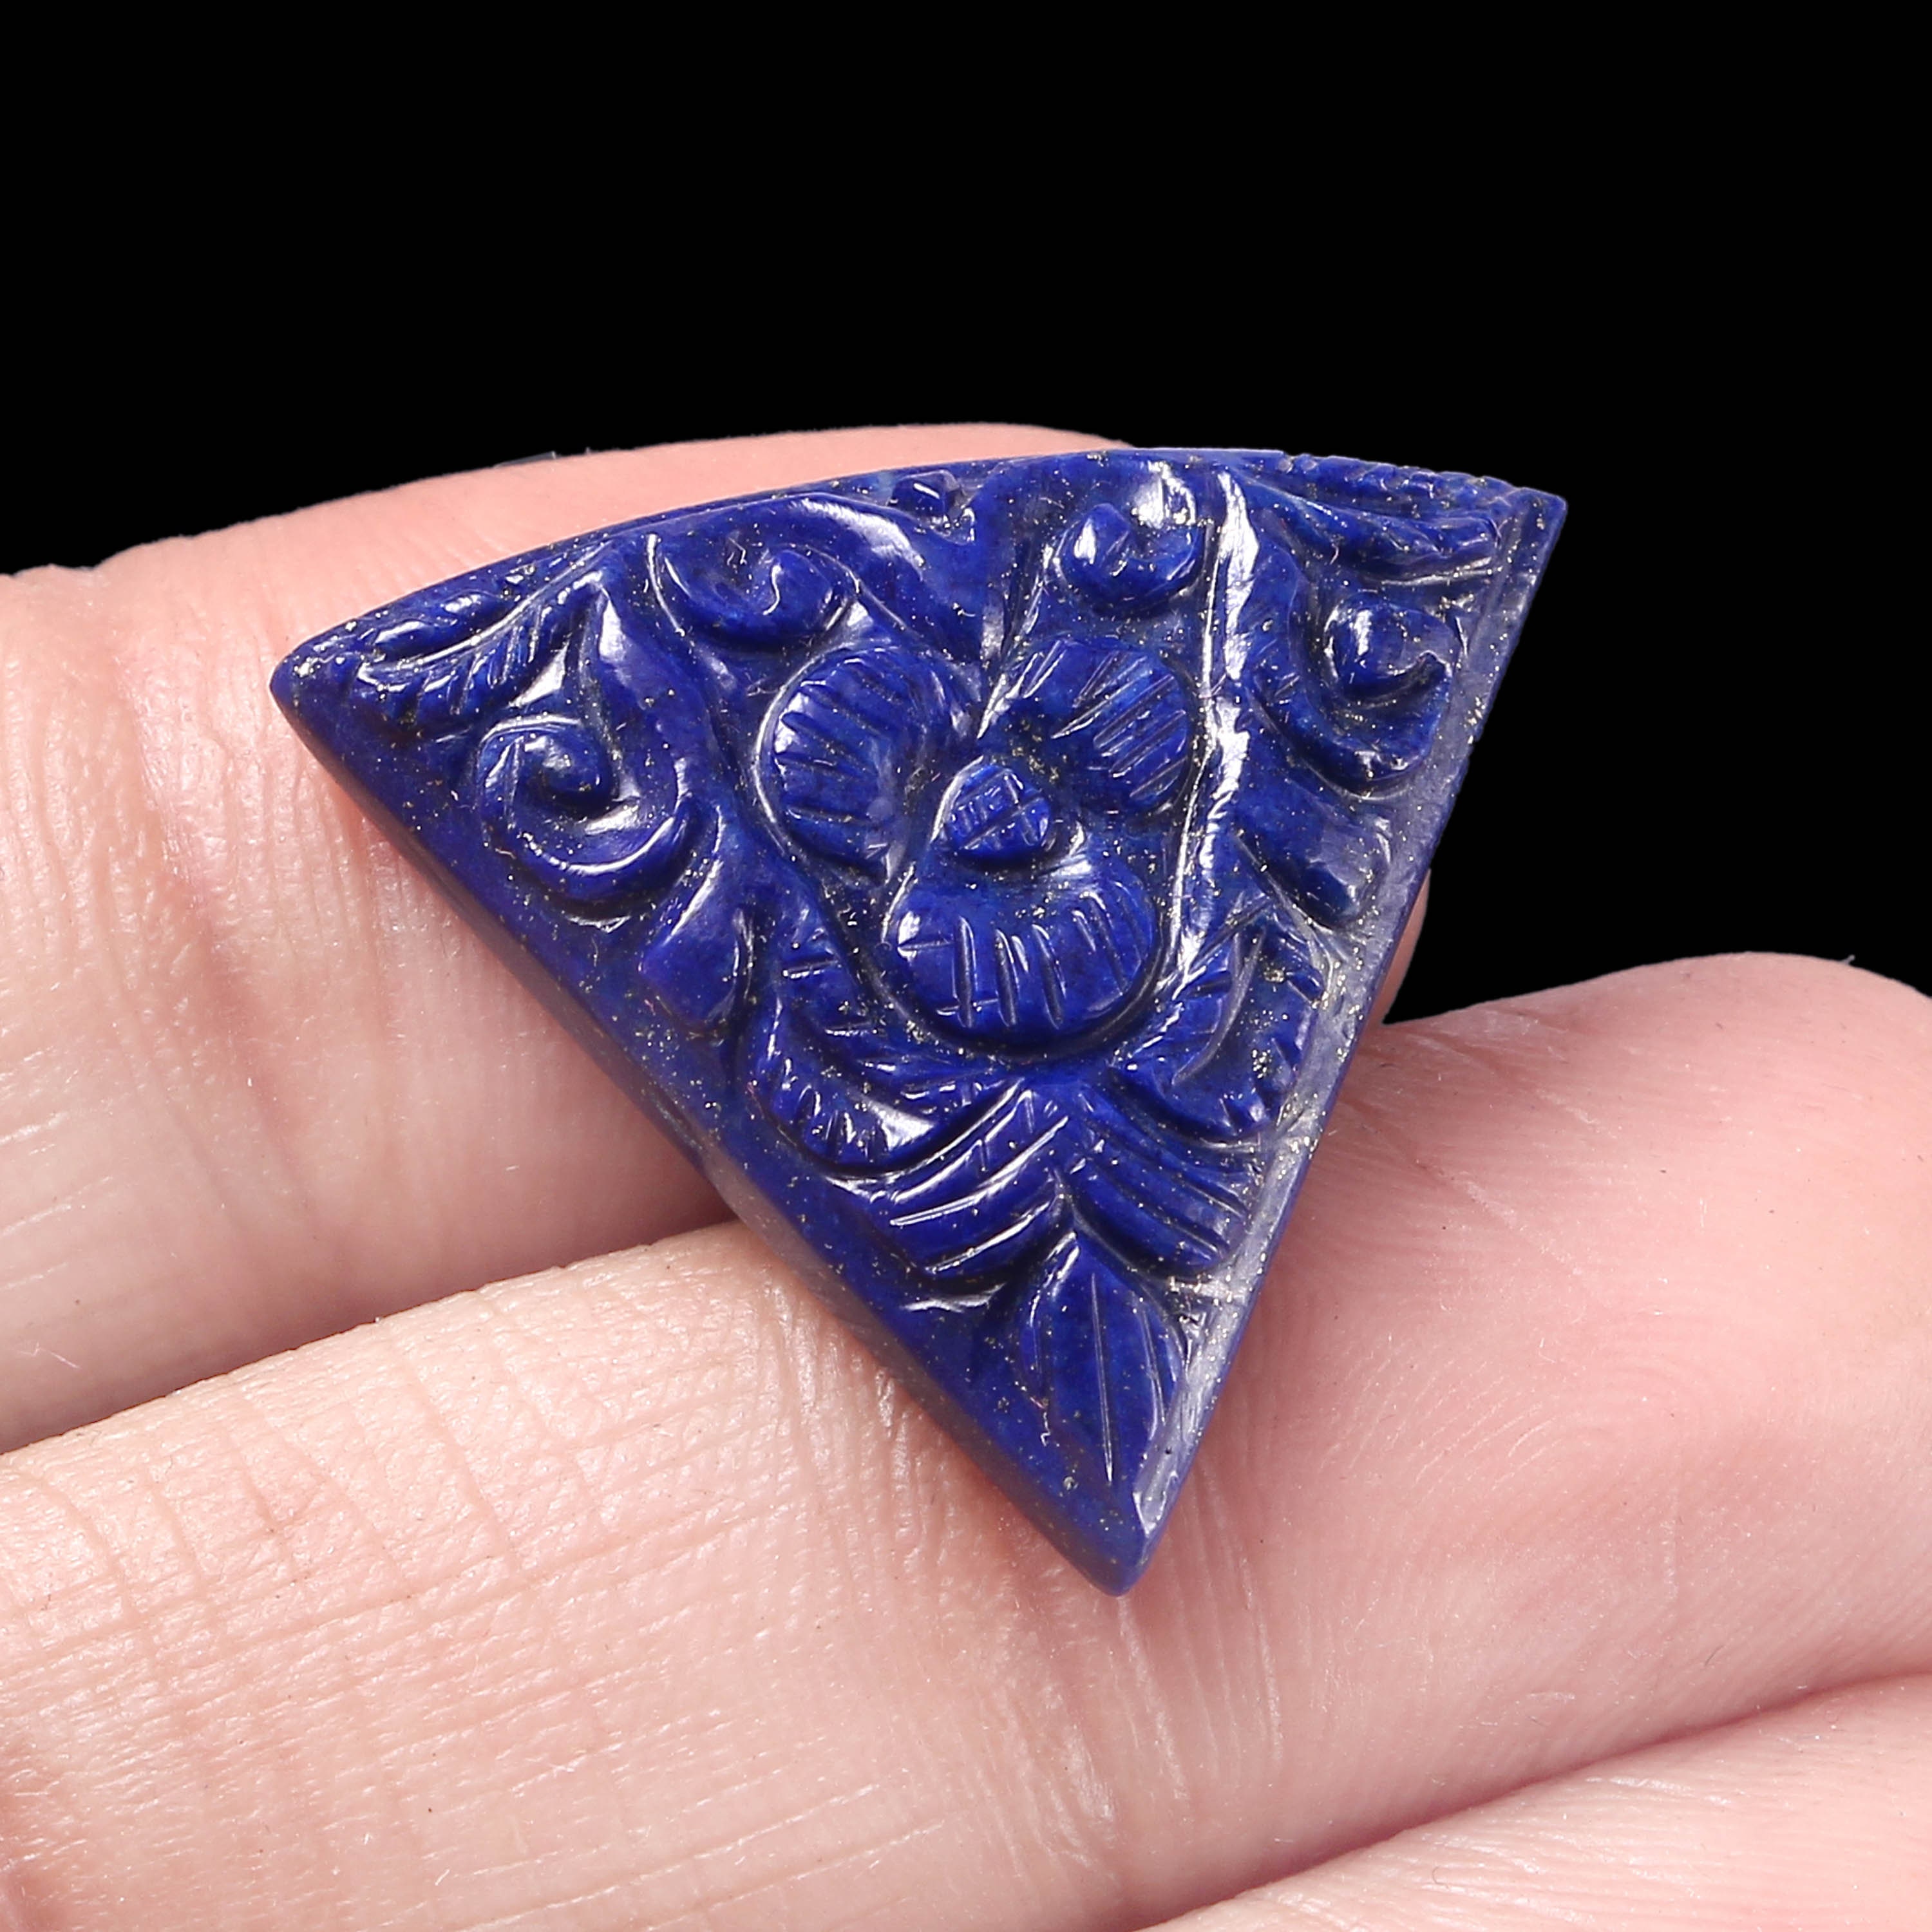 weight 16 crt 100% Natural Lapis carving gemstone   beautiful hand carved 2 pcs WT19 size 14.30x15.30 To 14.5x15.5 mm